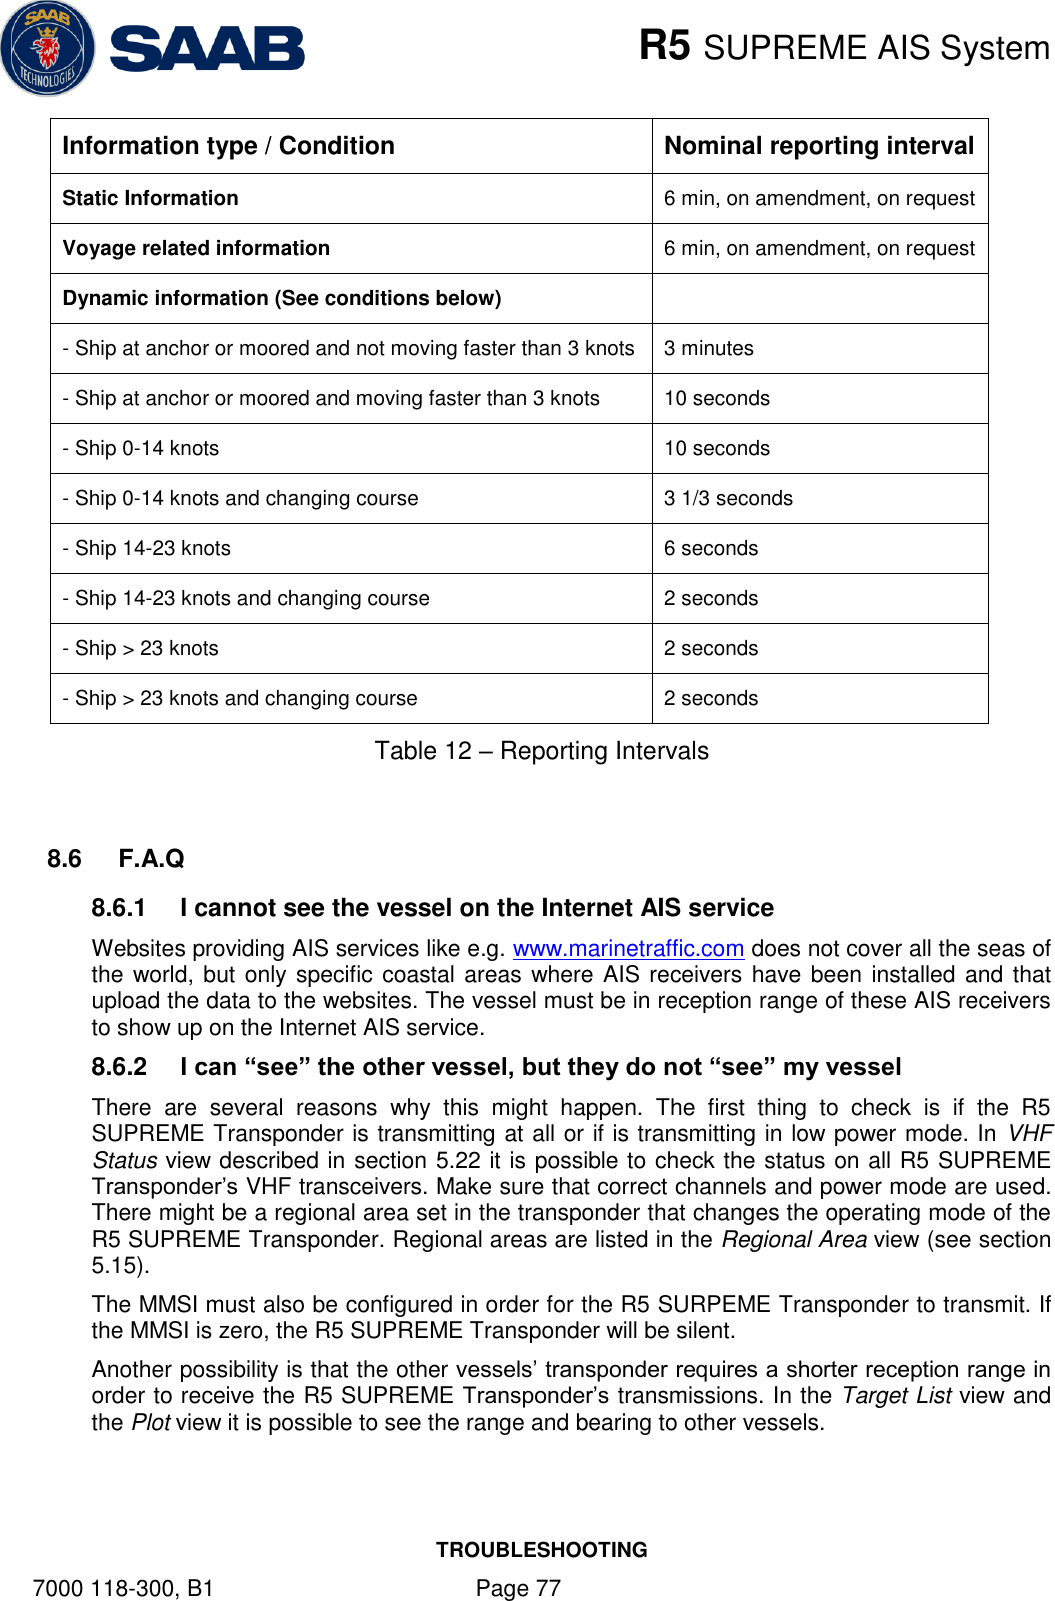    R5 SUPREME AIS System TROUBLESHOOTING 7000 118-300, B1    Page 77 Information type / Condition Nominal reporting interval Static Information 6 min, on amendment, on request Voyage related information 6 min, on amendment, on request Dynamic information (See conditions below)  - Ship at anchor or moored and not moving faster than 3 knots 3 minutes - Ship at anchor or moored and moving faster than 3 knots 10 seconds - Ship 0-14 knots 10 seconds - Ship 0-14 knots and changing course 3 1/3 seconds - Ship 14-23 knots 6 seconds - Ship 14-23 knots and changing course 2 seconds - Ship &gt; 23 knots 2 seconds - Ship &gt; 23 knots and changing course 2 seconds Table 12 – Reporting Intervals  8.6  F.A.Q 8.6.1  I cannot see the vessel on the Internet AIS service Websites providing AIS services like e.g. www.marinetraffic.com does not cover all the seas of the world, but  only specific coastal areas where AIS receivers have been installed and that upload the data to the websites. The vessel must be in reception range of these AIS receivers to show up on the Internet AIS service. 8.6.2  I can “see” the other vessel, but they do not “see” my vessel There  are  several  reasons  why  this  might  happen.  The  first  thing  to  check  is  if  the  R5 SUPREME Transponder is transmitting at all or if is transmitting in low power mode. In VHF Status view described in section 5.22 it is possible to check the status on all R5 SUPREME Transponder’s VHF transceivers. Make sure that correct channels and power mode are used. There might be a regional area set in the transponder that changes the operating mode of the R5 SUPREME Transponder. Regional areas are listed in the Regional Area view (see section 5.15). The MMSI must also be configured in order for the R5 SURPEME Transponder to transmit. If the MMSI is zero, the R5 SUPREME Transponder will be silent. Another possibility is that the other vessels’ transponder requires a shorter reception range in order to receive the R5 SUPREME Transponder’s transmissions. In the Target List view and the Plot view it is possible to see the range and bearing to other vessels. 